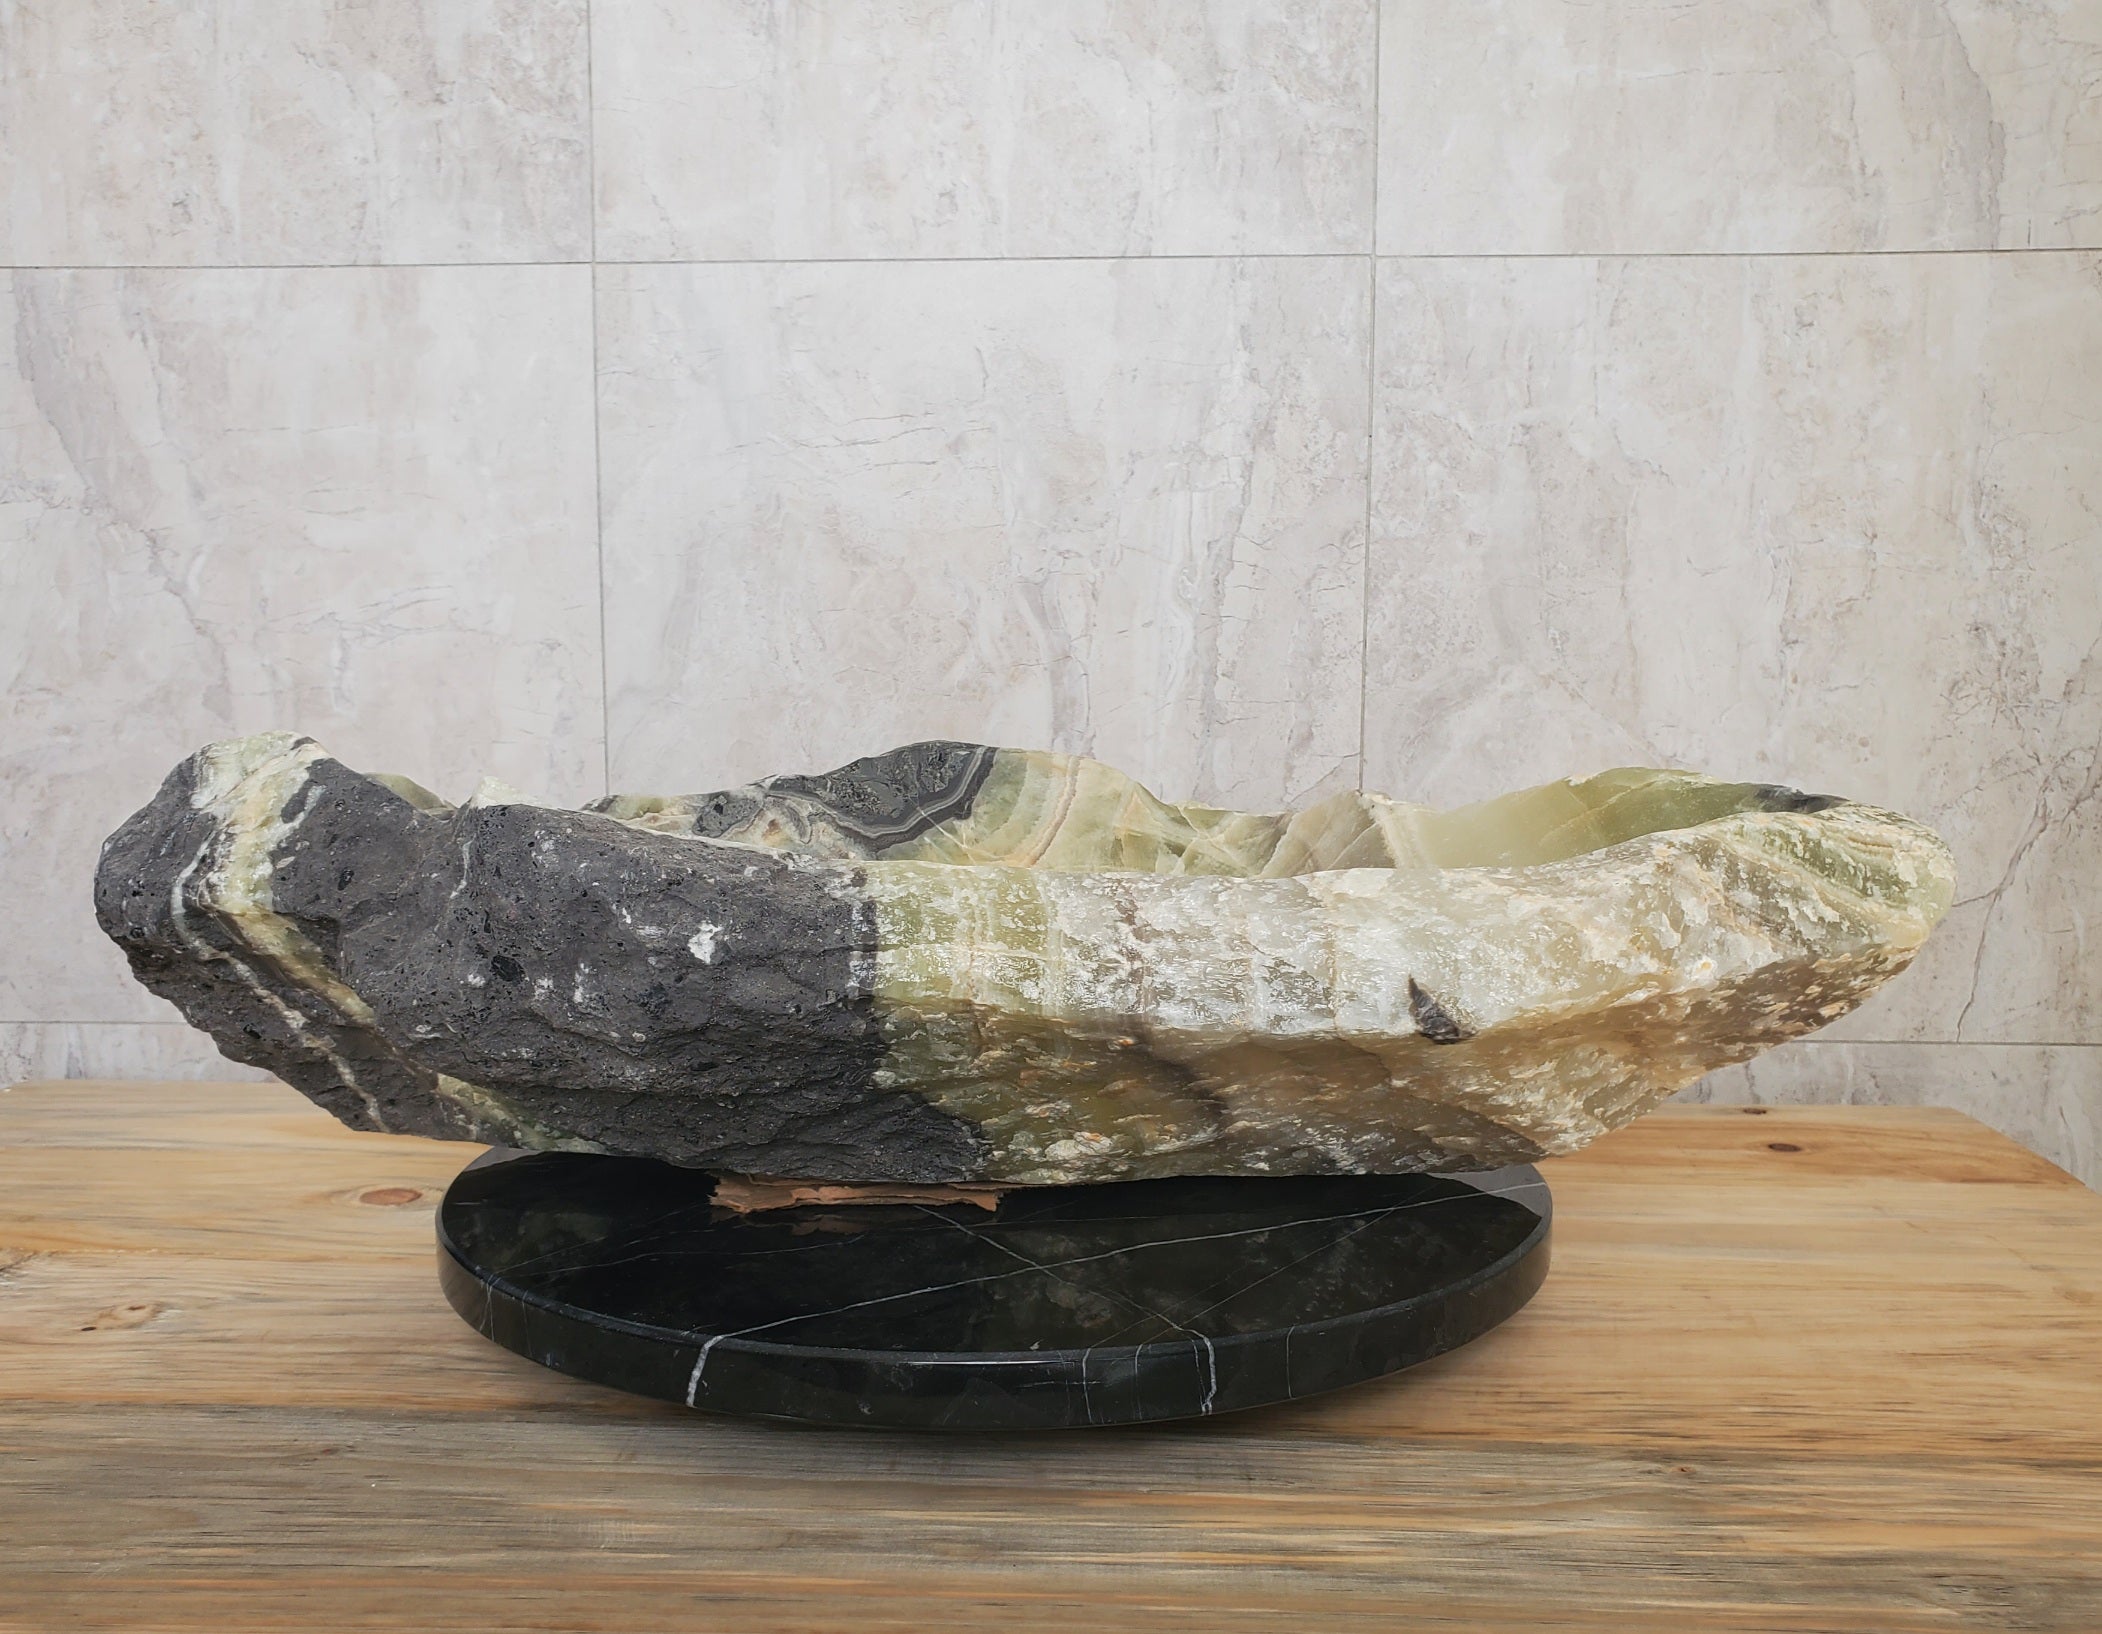 Green Onyx Stone Bathroom Vessel Sink. Epoxy Sealant is available with fast shipping. Standard drain size. A beautiful work of art. Handmade. Buy Now at www.felipeandgrace.com.